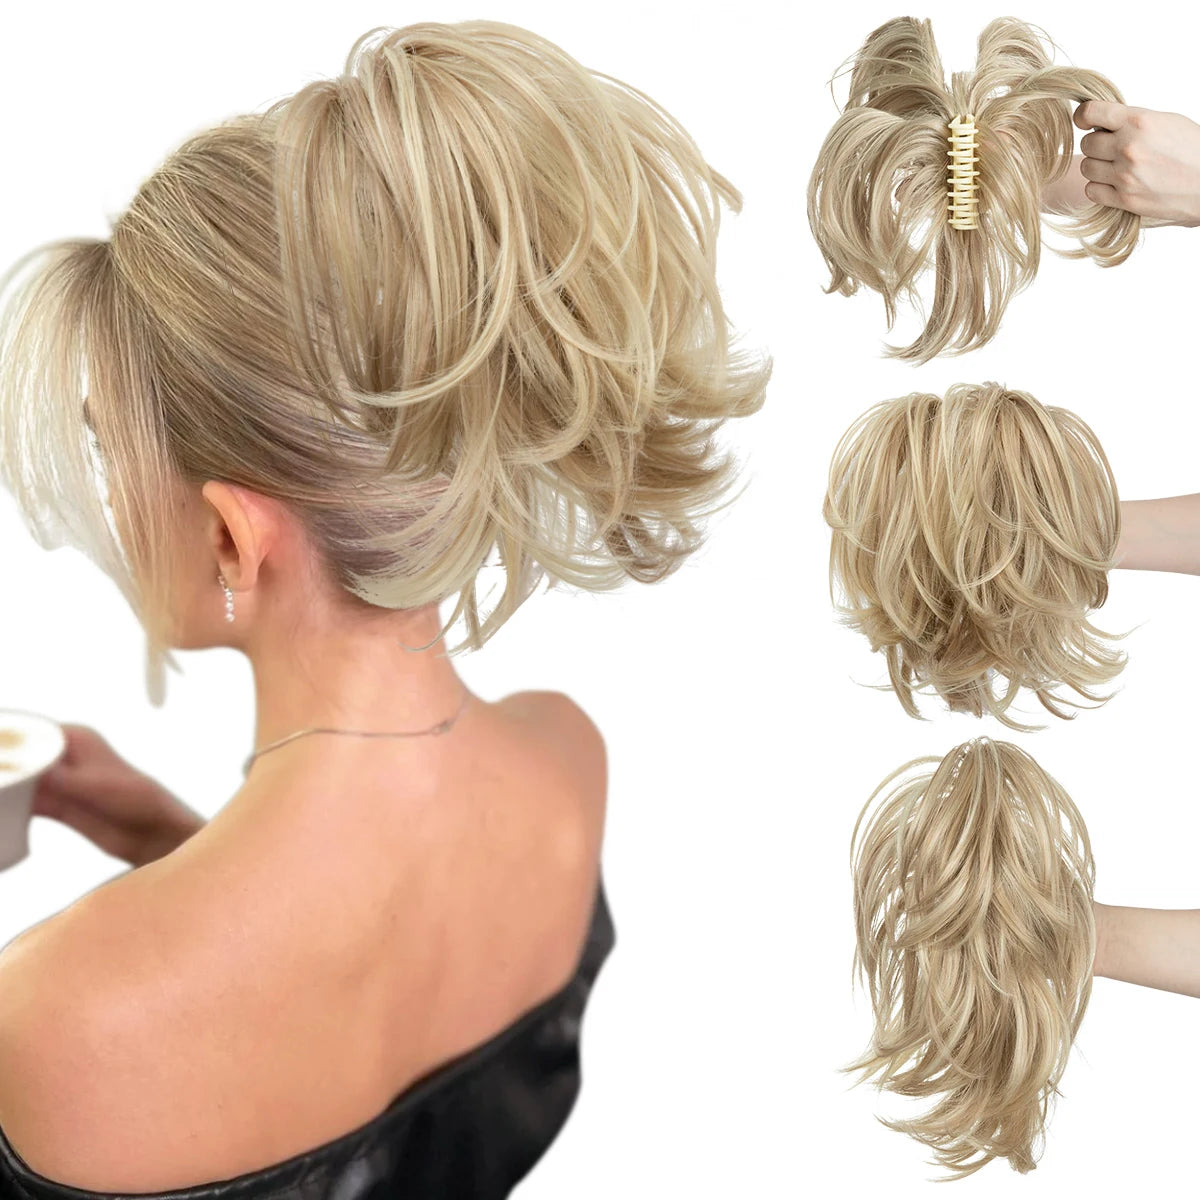 Claw Clip In Ponytail Hair Extensions Diy Hairpiece